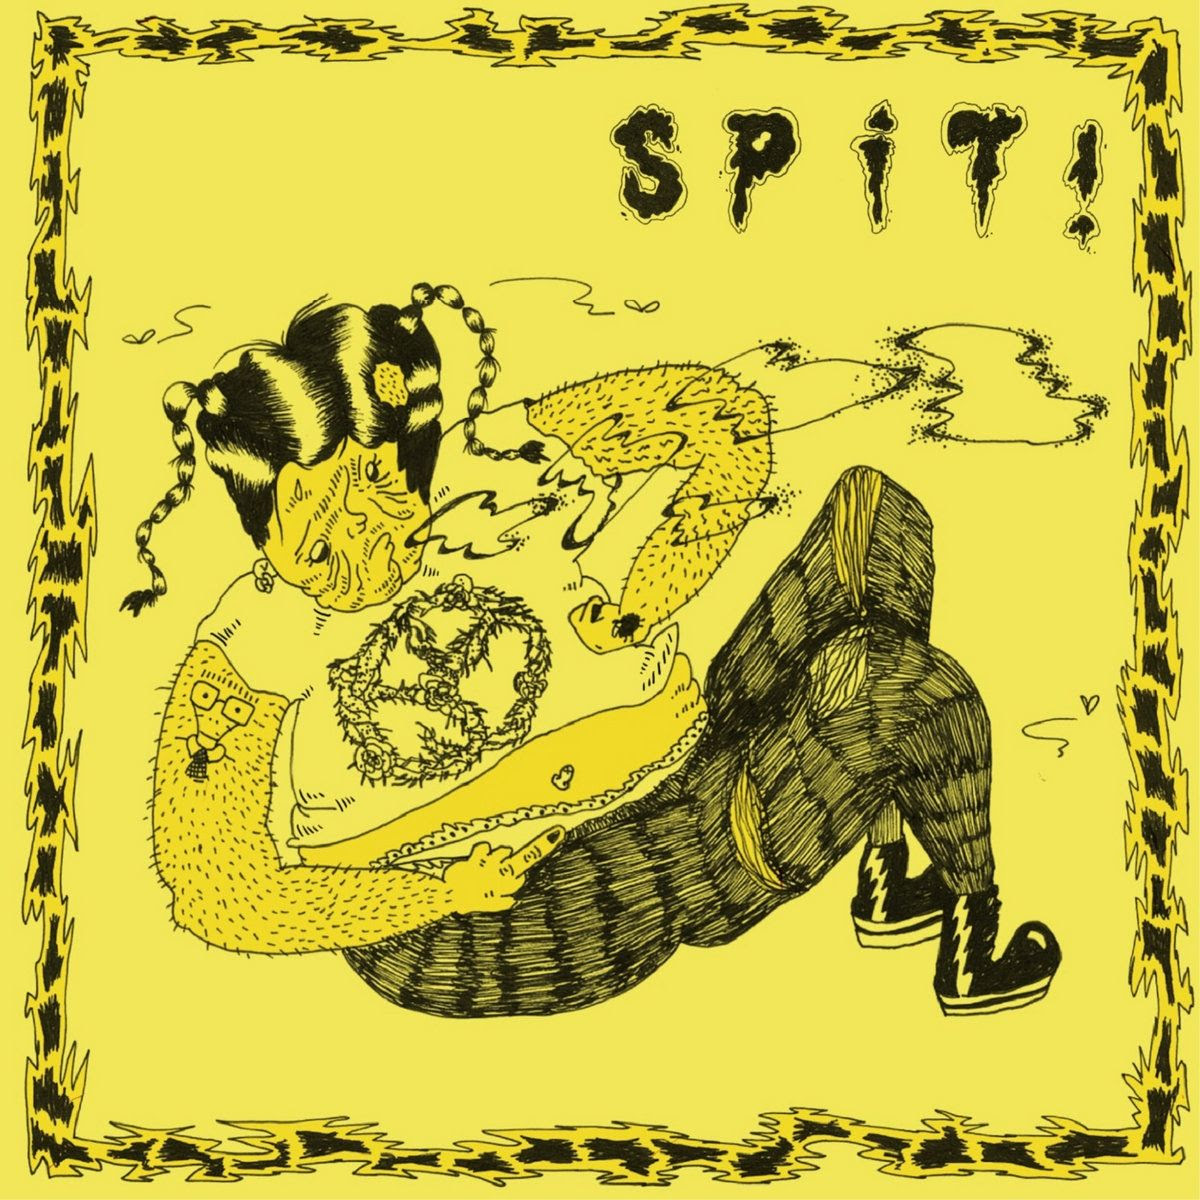 REVIEW: Hardcore Punk Act SPIT Release Self-Titled Debut Album 